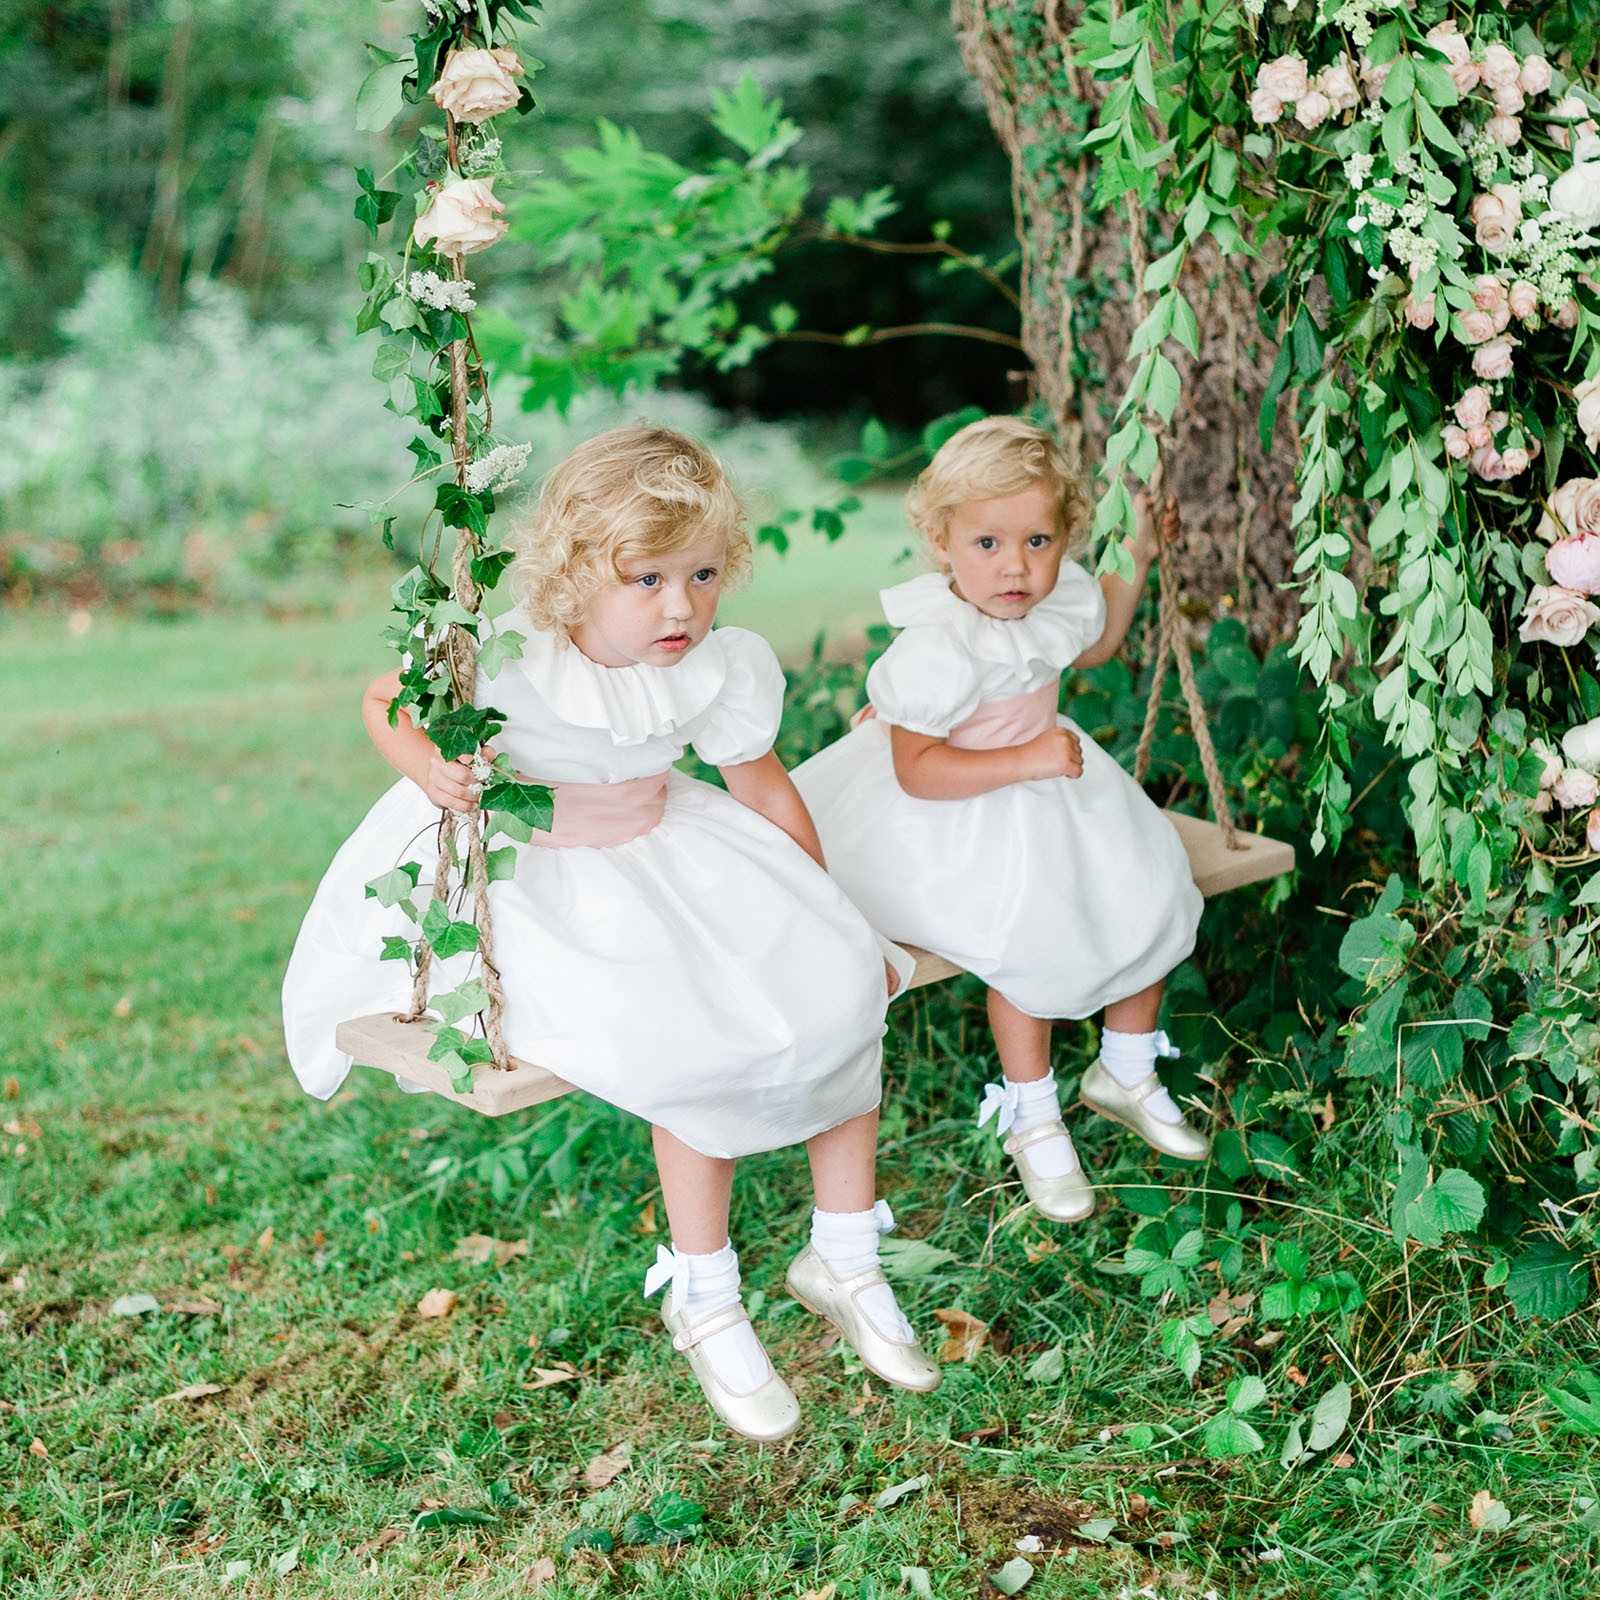 Eulalie white flower girl dress with puff sleeves and ruffled collar by Royal designer Little Eglantine